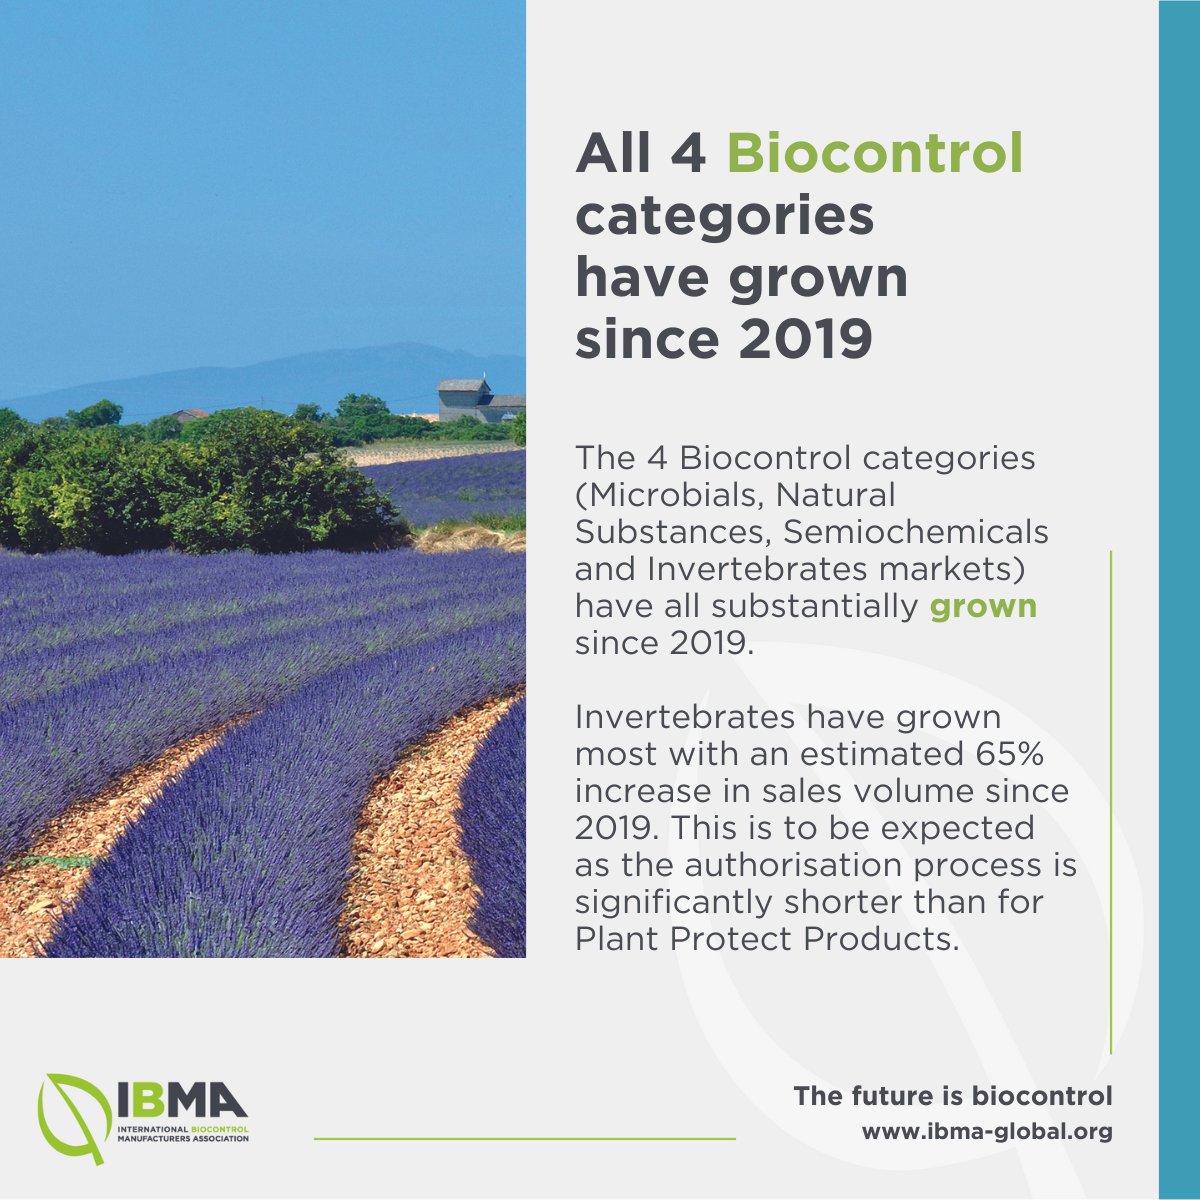 Have you seen our latest annual member survey yet?  The survey reveals 3 promising highlights:   💶 The EU #Biocontrol market is now valued at over 1.6 billion euros   📈 SMEs are a driving force in Biocontrol  🌾 All 4 Biocontrol categories have grown since 2019 See below ⬇️